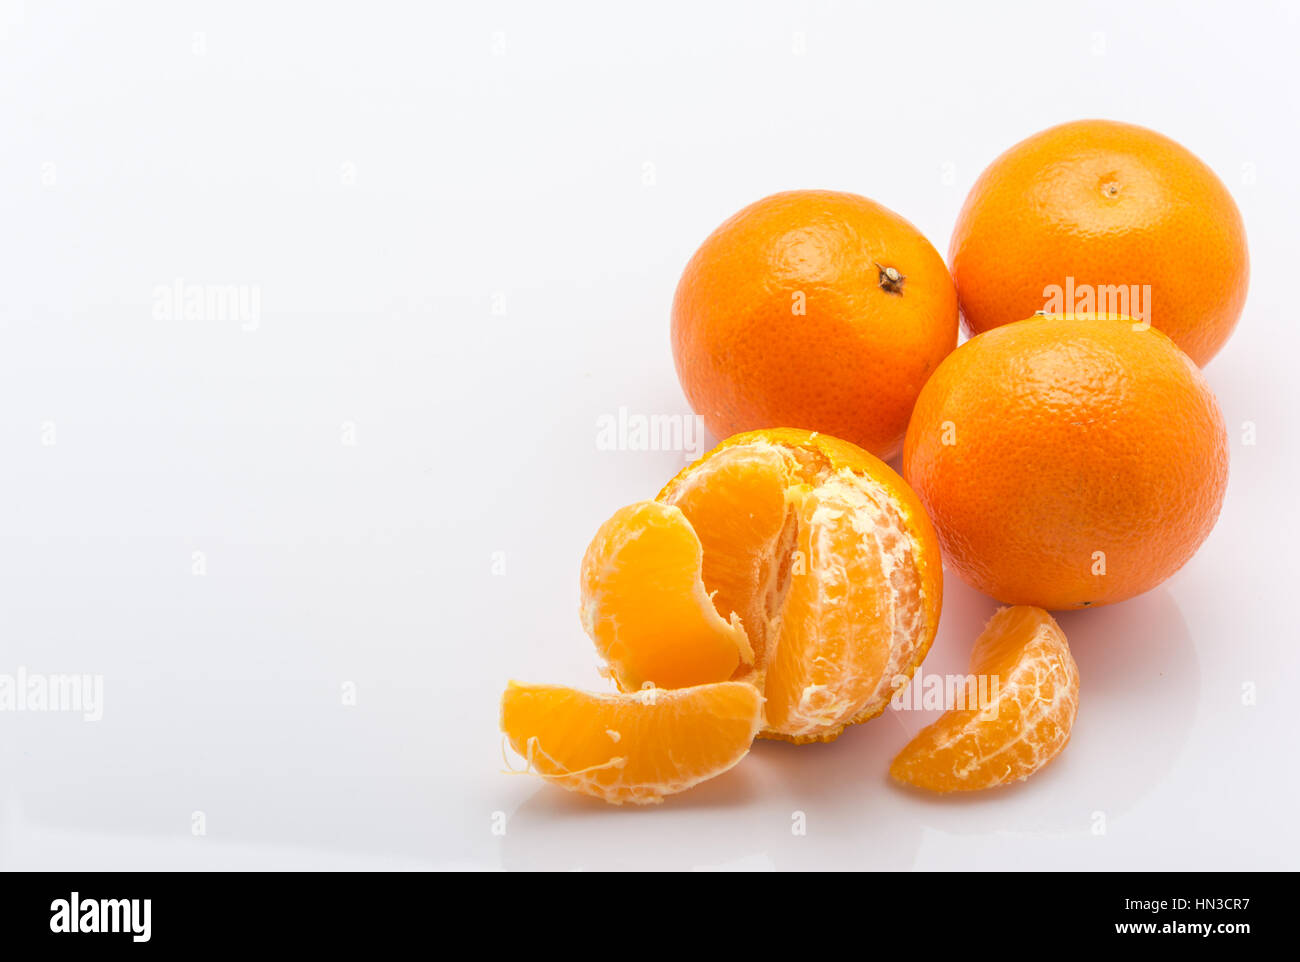 tangerines, peeled tangerine and tangerine slices on a white background Stock Photo